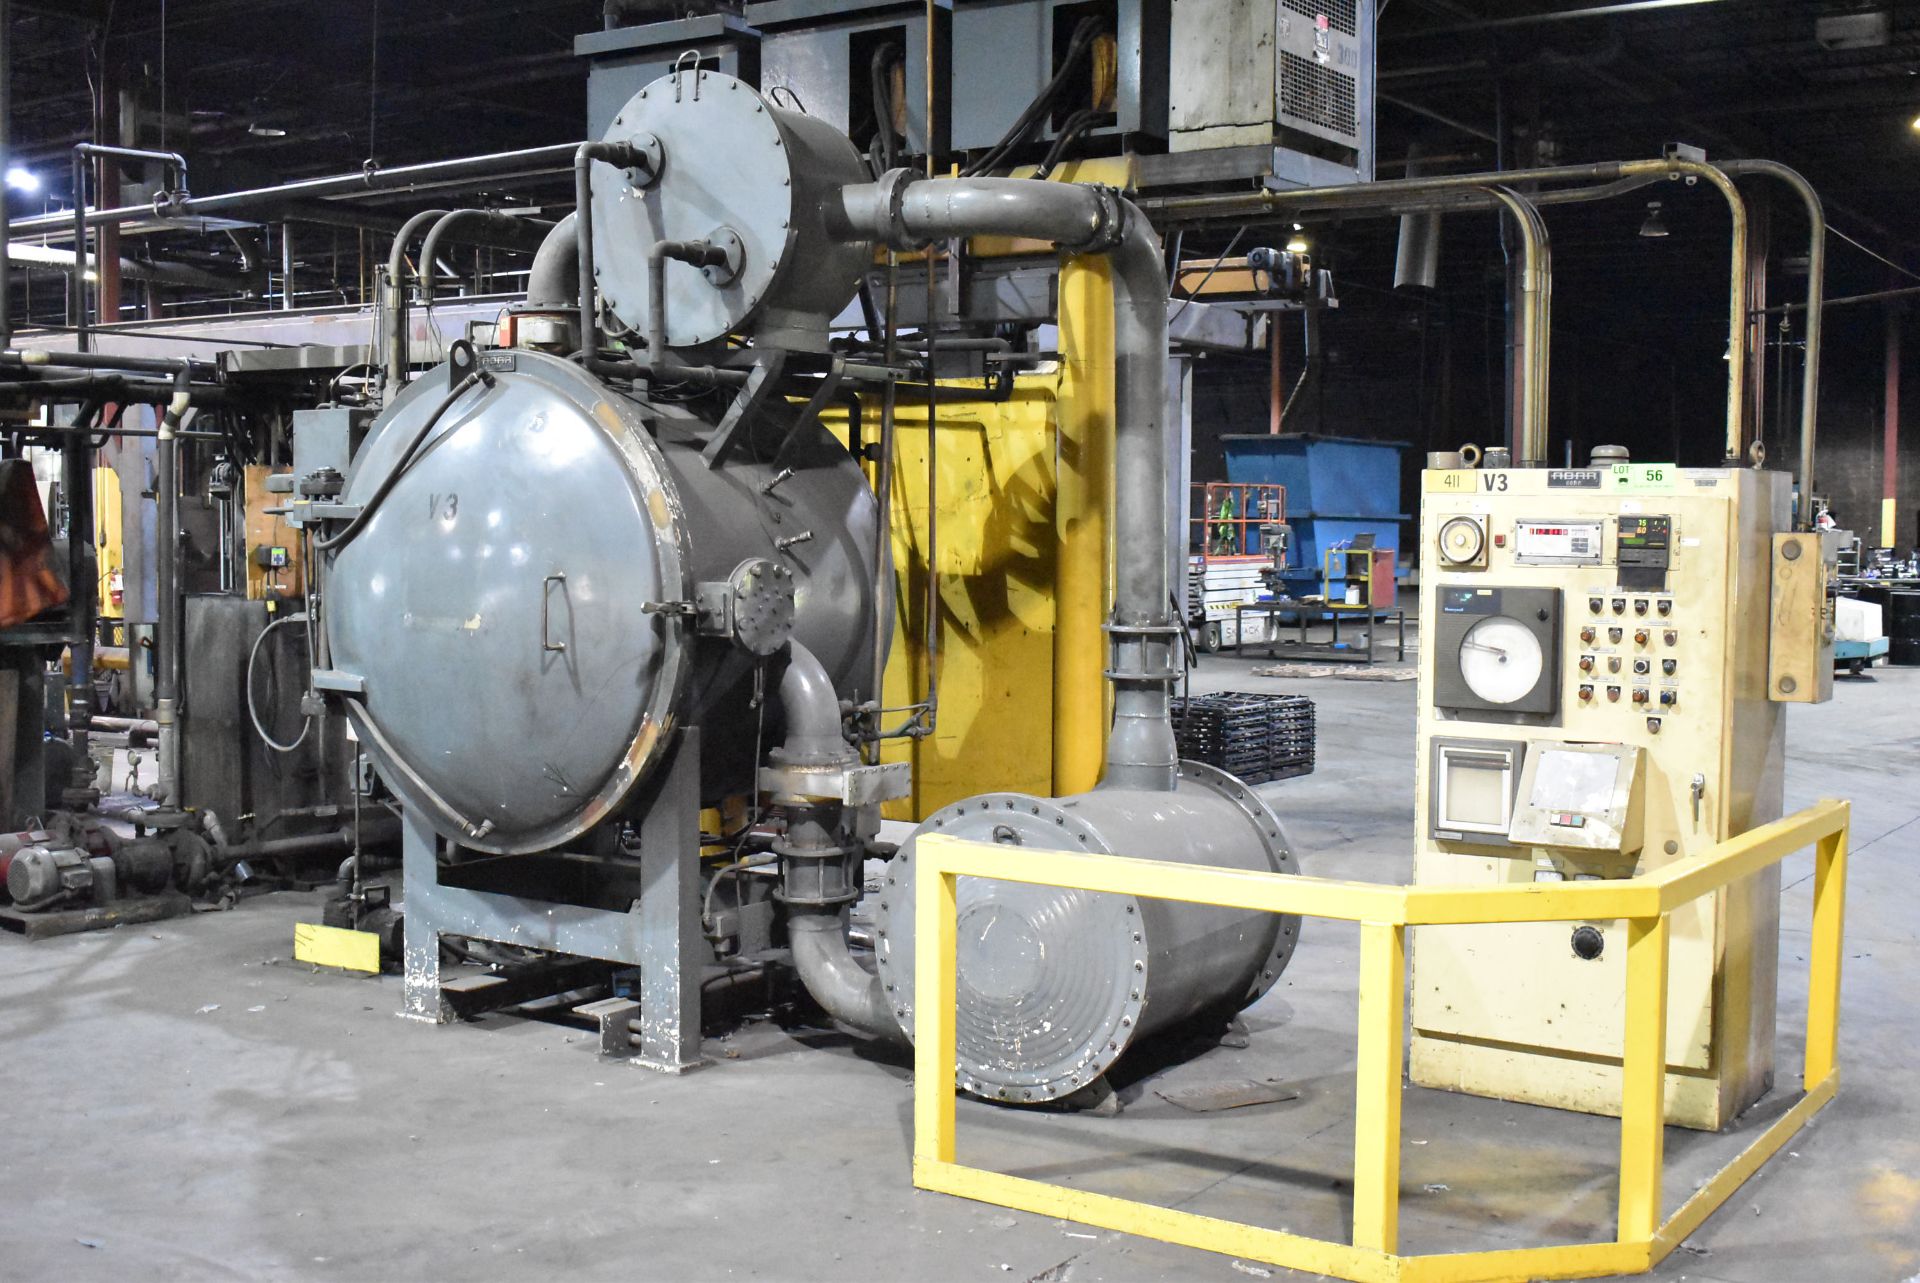 ABAR HR 34 ELECTRIC VACUUM FURNACE WITH 2400 DEGREES F MAX TEMP, 24"Wx24"Hx36"D APPROX SIZE, 1,000LB - Image 2 of 18